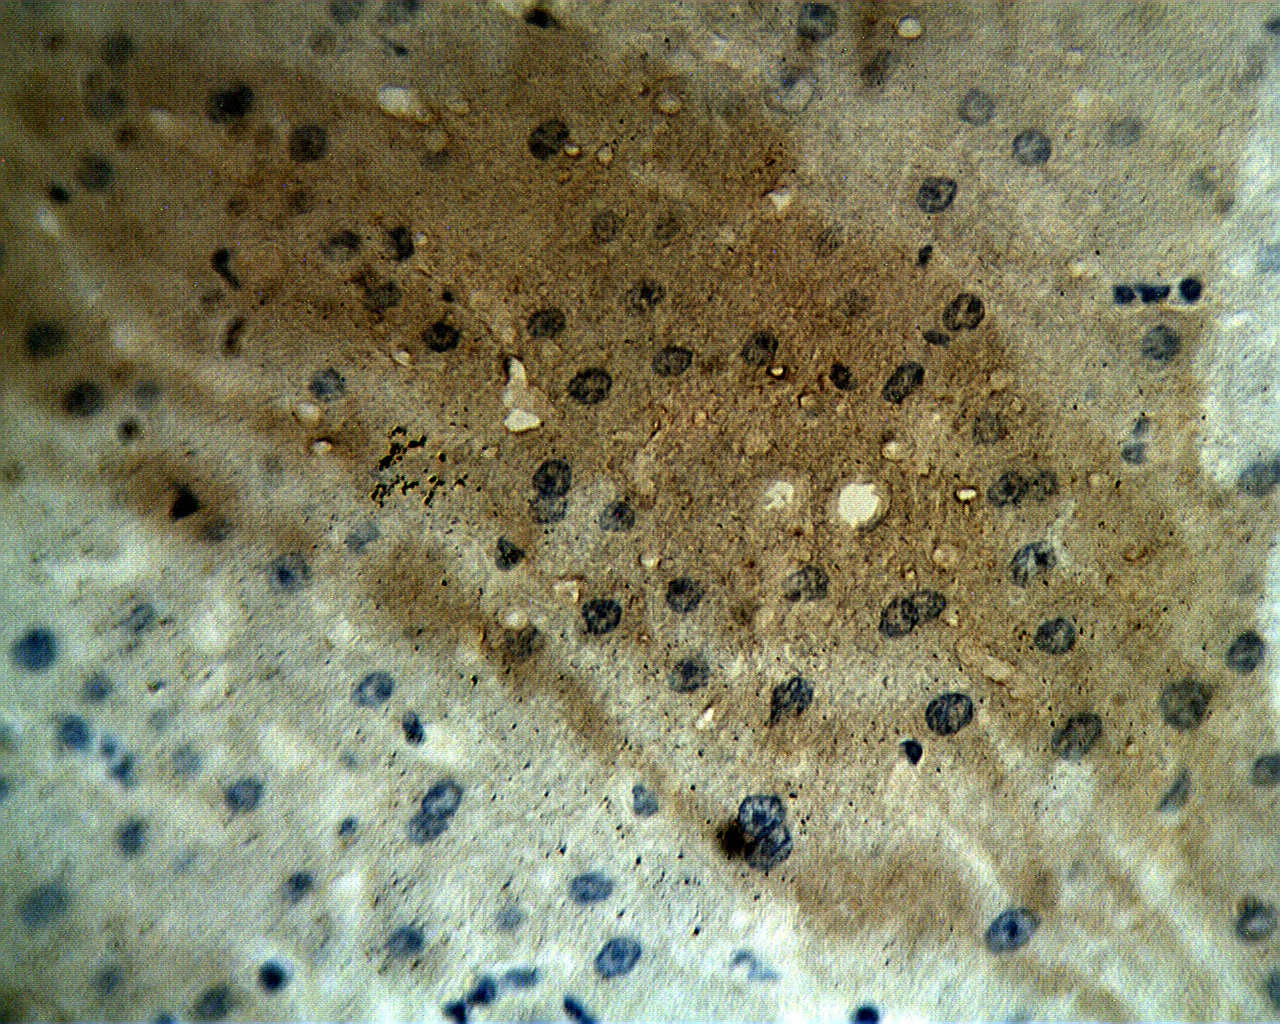 Staining on paraffin embedded human hepatocellular carcinoma sections. Primary Ab at 10 µg/ml. Antigen retrieval used: 10 mM Na Citrate pH 6.0, 10 minutes pressure cooker method, developed with anti rabbit HRP and DAP substrate.  Counterstained with methyl blue.